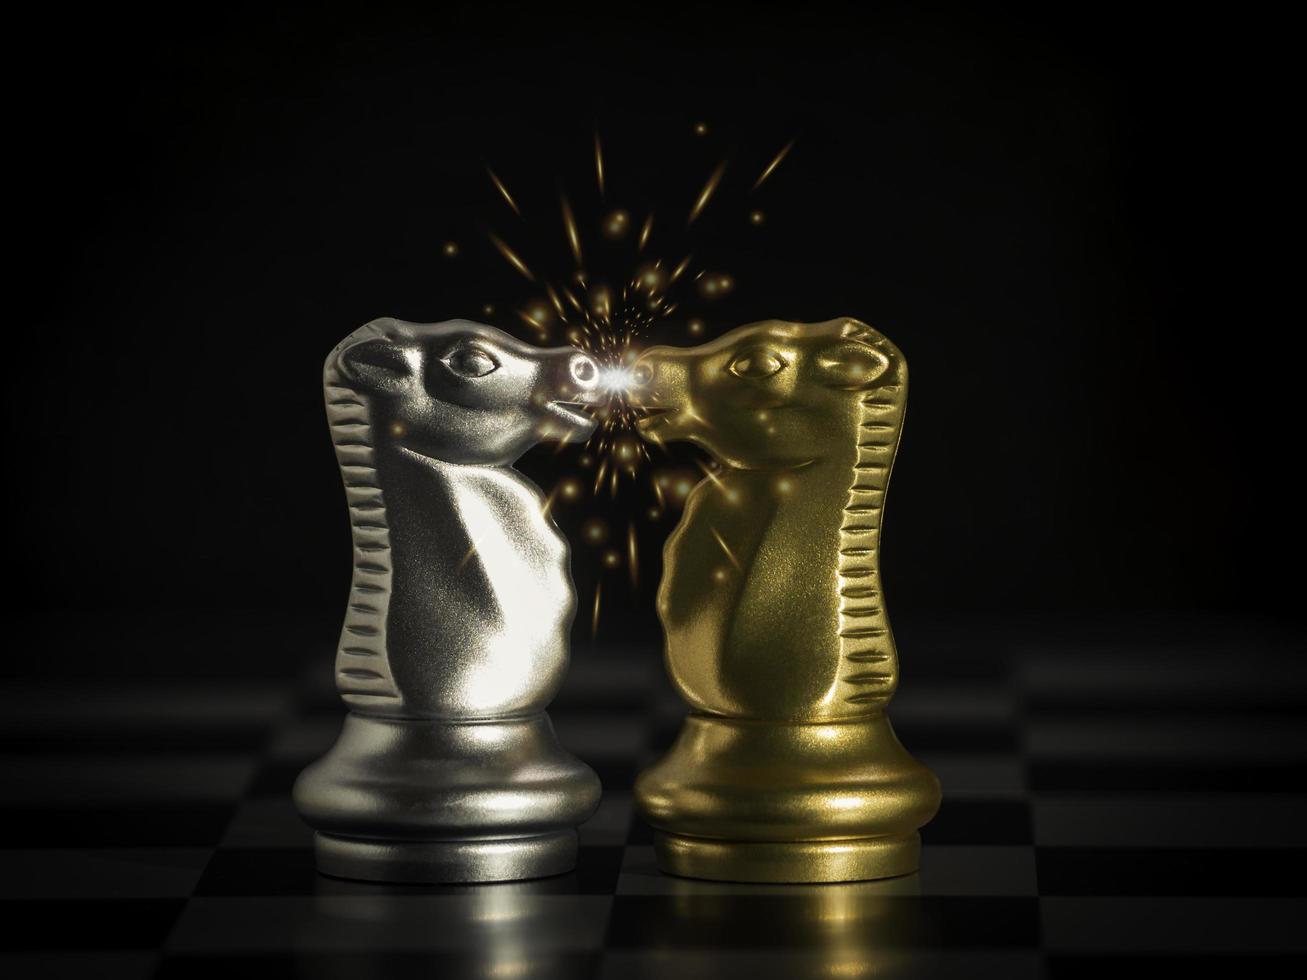 Gold knight chess facing silver knight chess with red hot flying sparks fire on chess board. Business leader market target strategy. business competition success, strategy ideas. photo